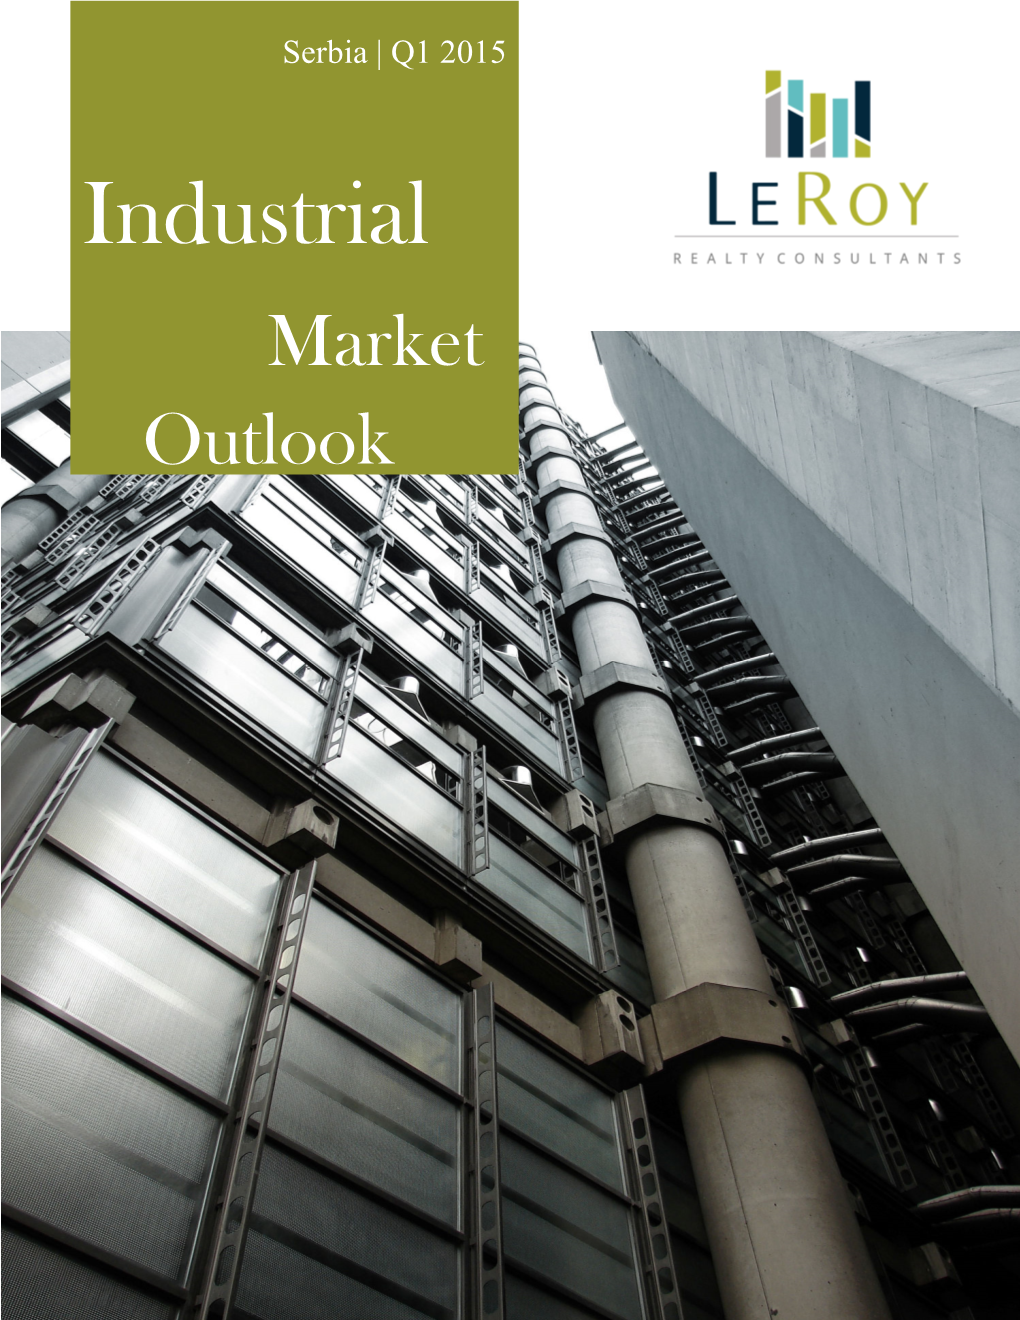 Industrial Market Outlook | Q1 2015 | Leroy Realty Consultants 1